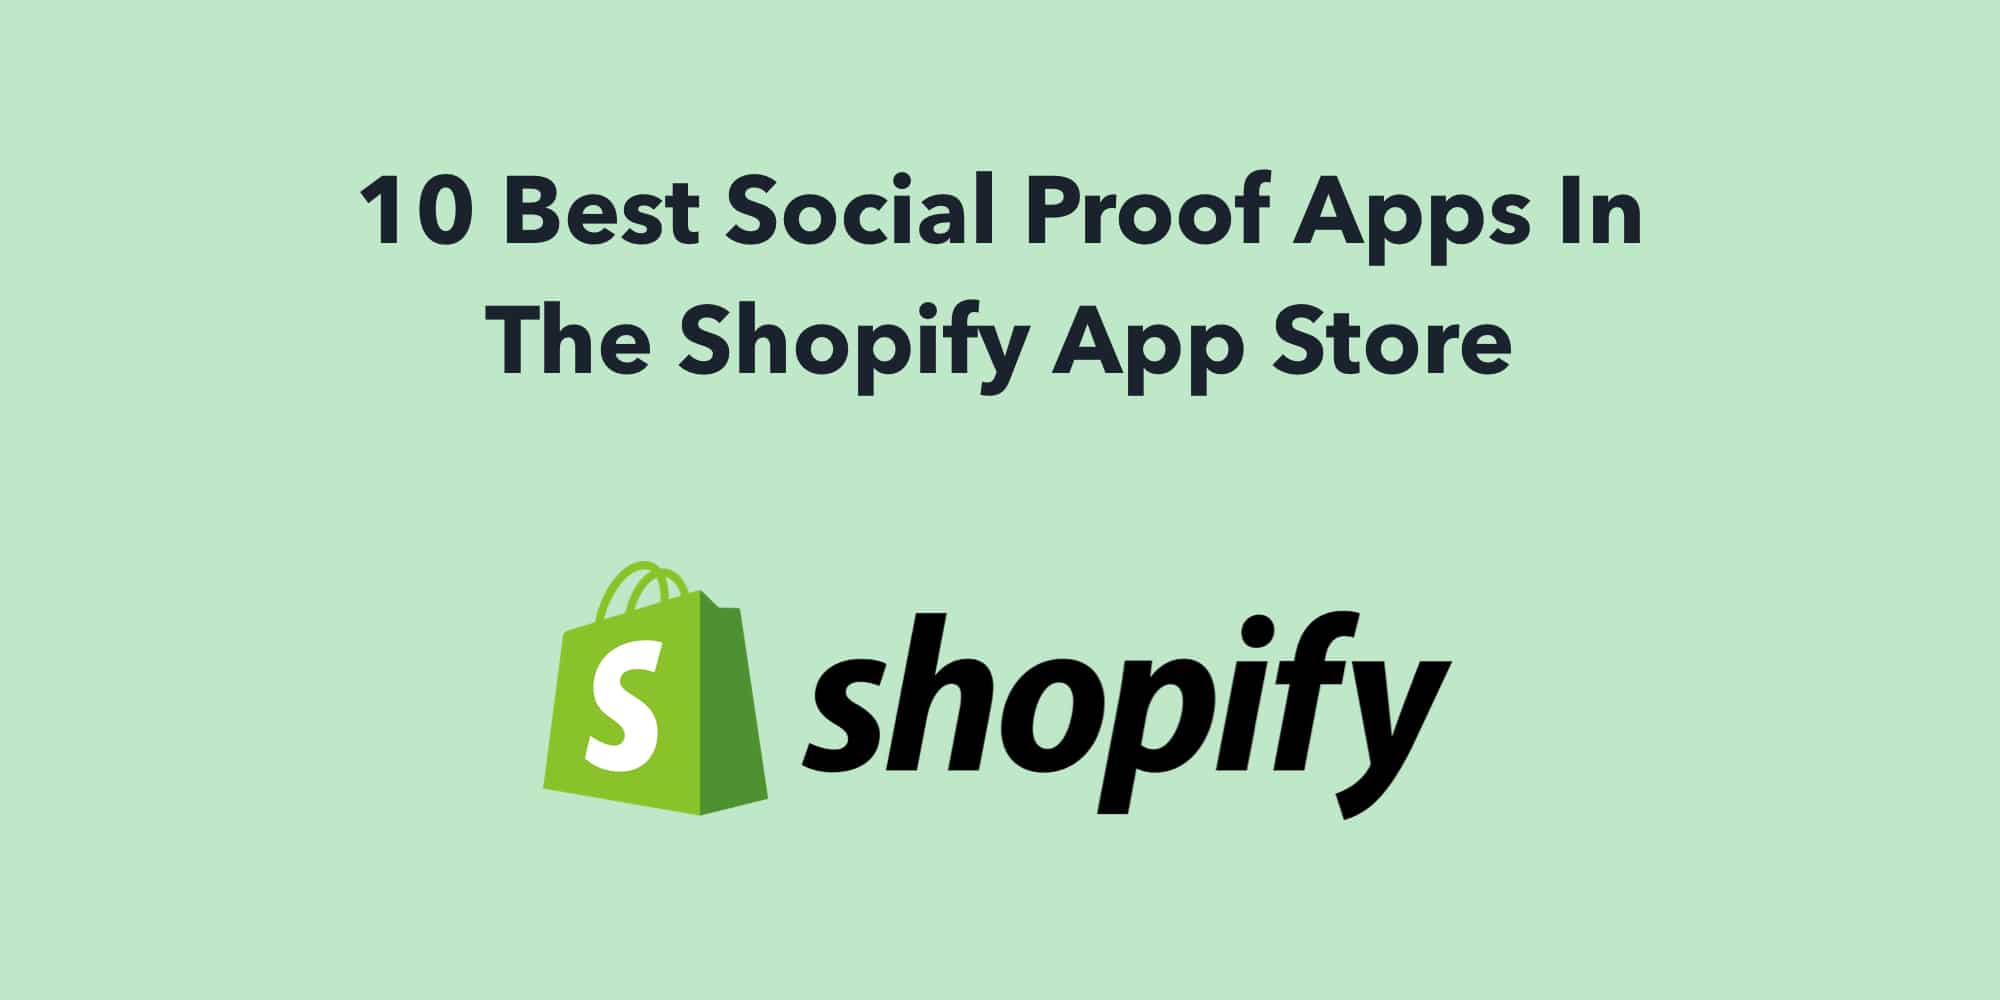 10 Best Social Proof Apps In The Shopify App Store